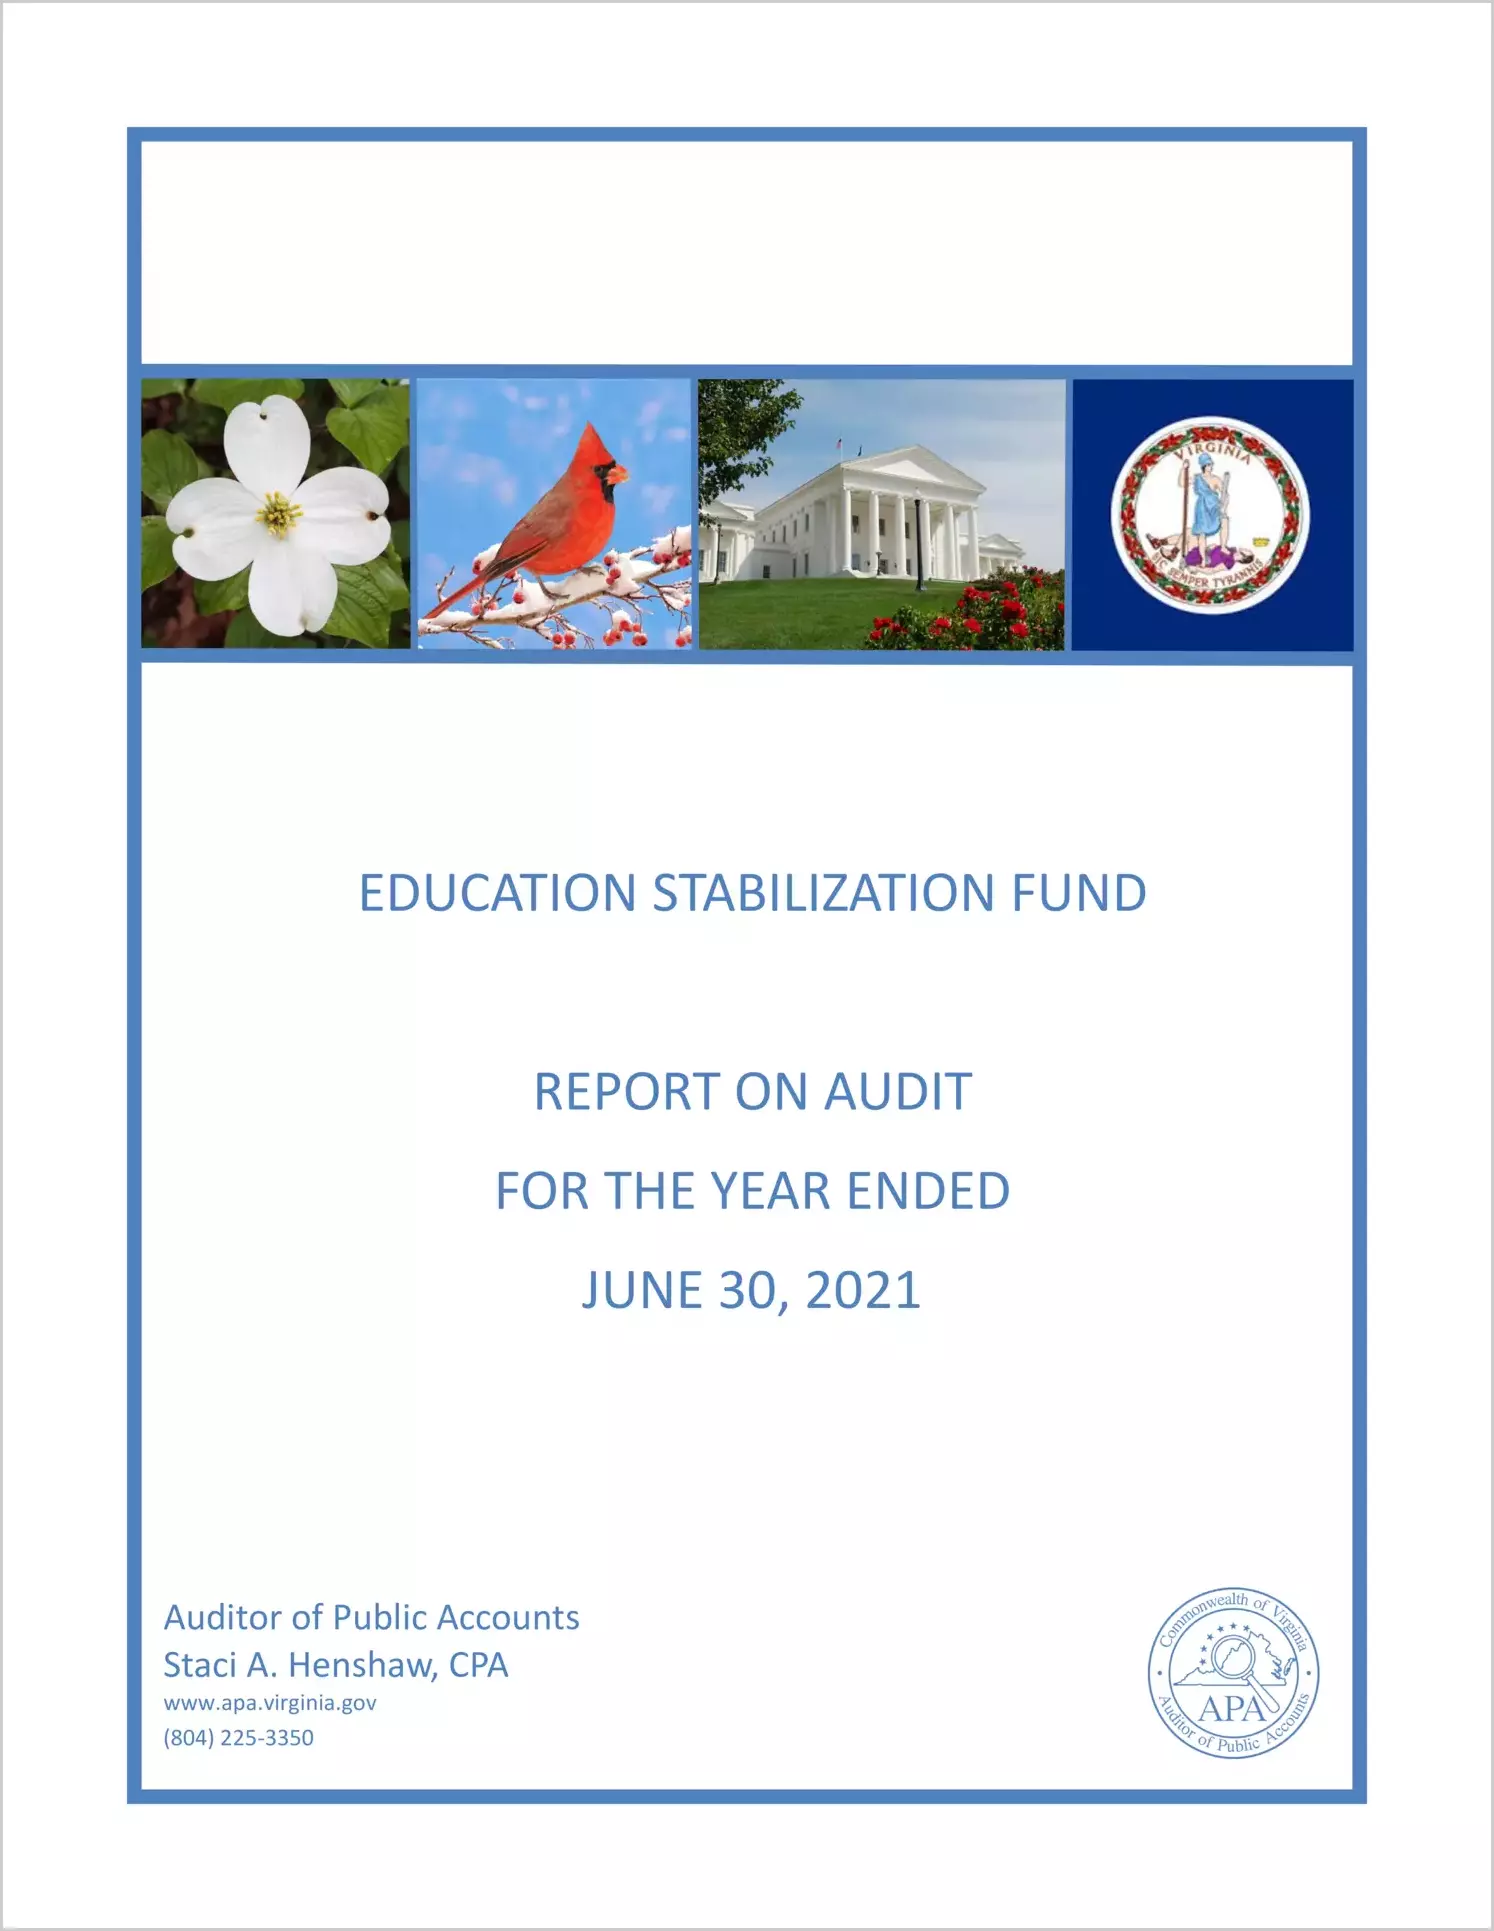 Education Stabilization Fund for the year ended June 30, 2021